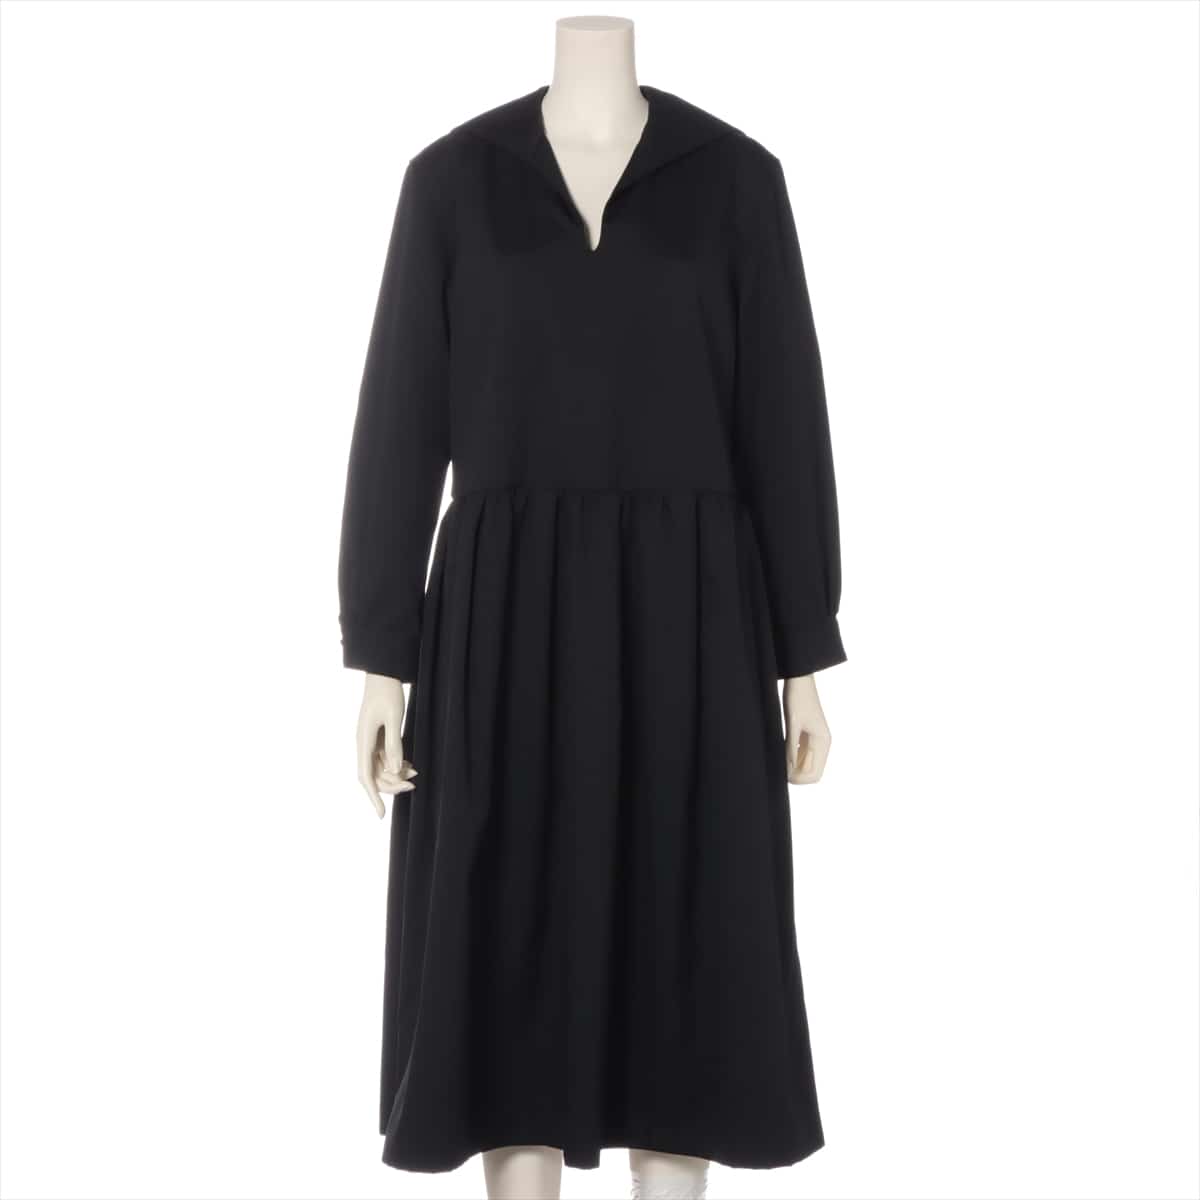 COMME des GARCONS GIRL Wool & Polyester Dress XS Ladies' Black